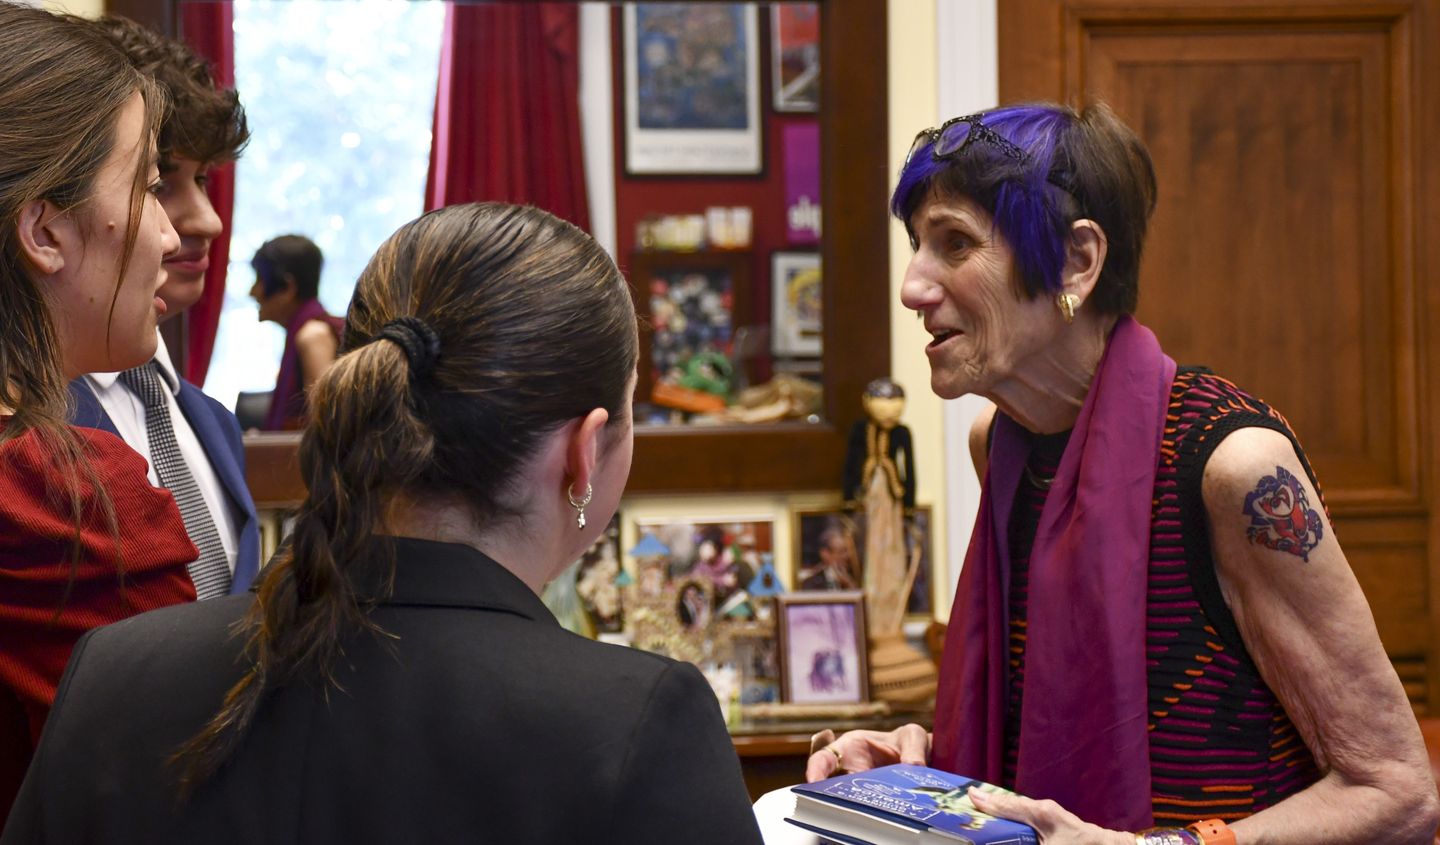 Rep. Rosa DeLauro gets tattoo at age 80 alongside her 18-year-old granddaughter